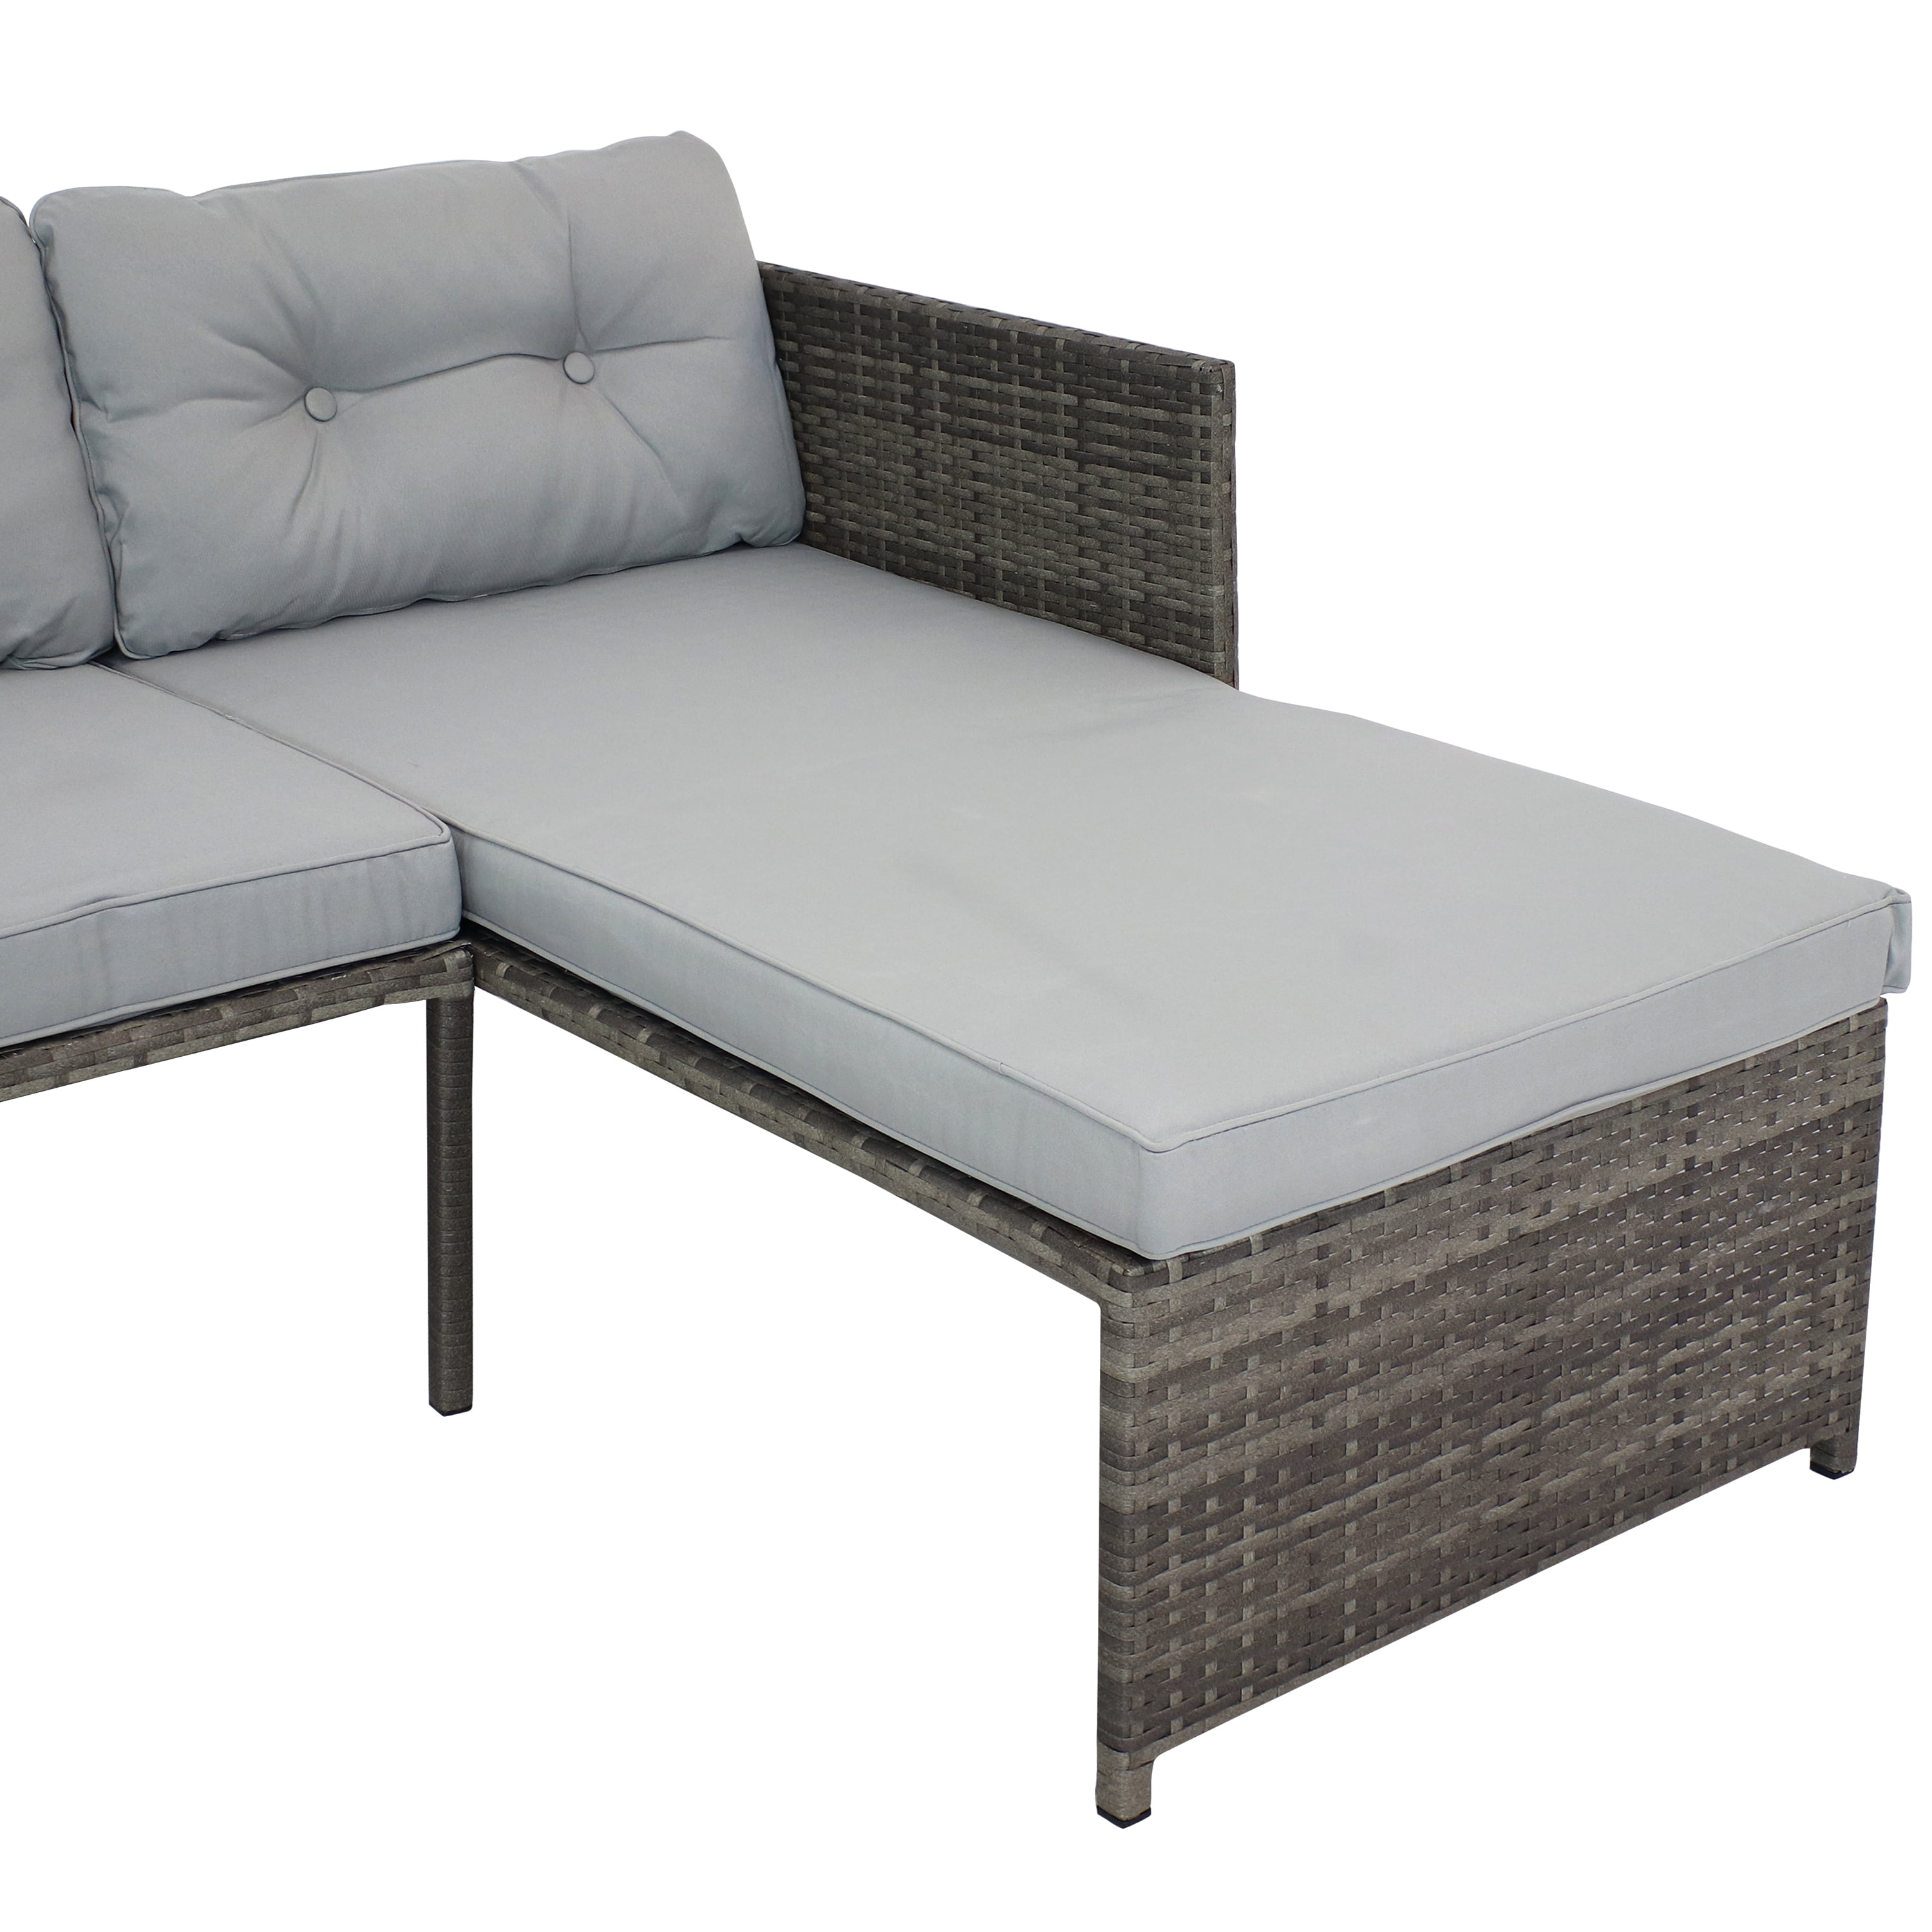 Sunnydaze Outdoor Longford Patio Sectional Sofa Conversation Set with Cushions and Table - Stone Gray - 3pc - image 5 of 11